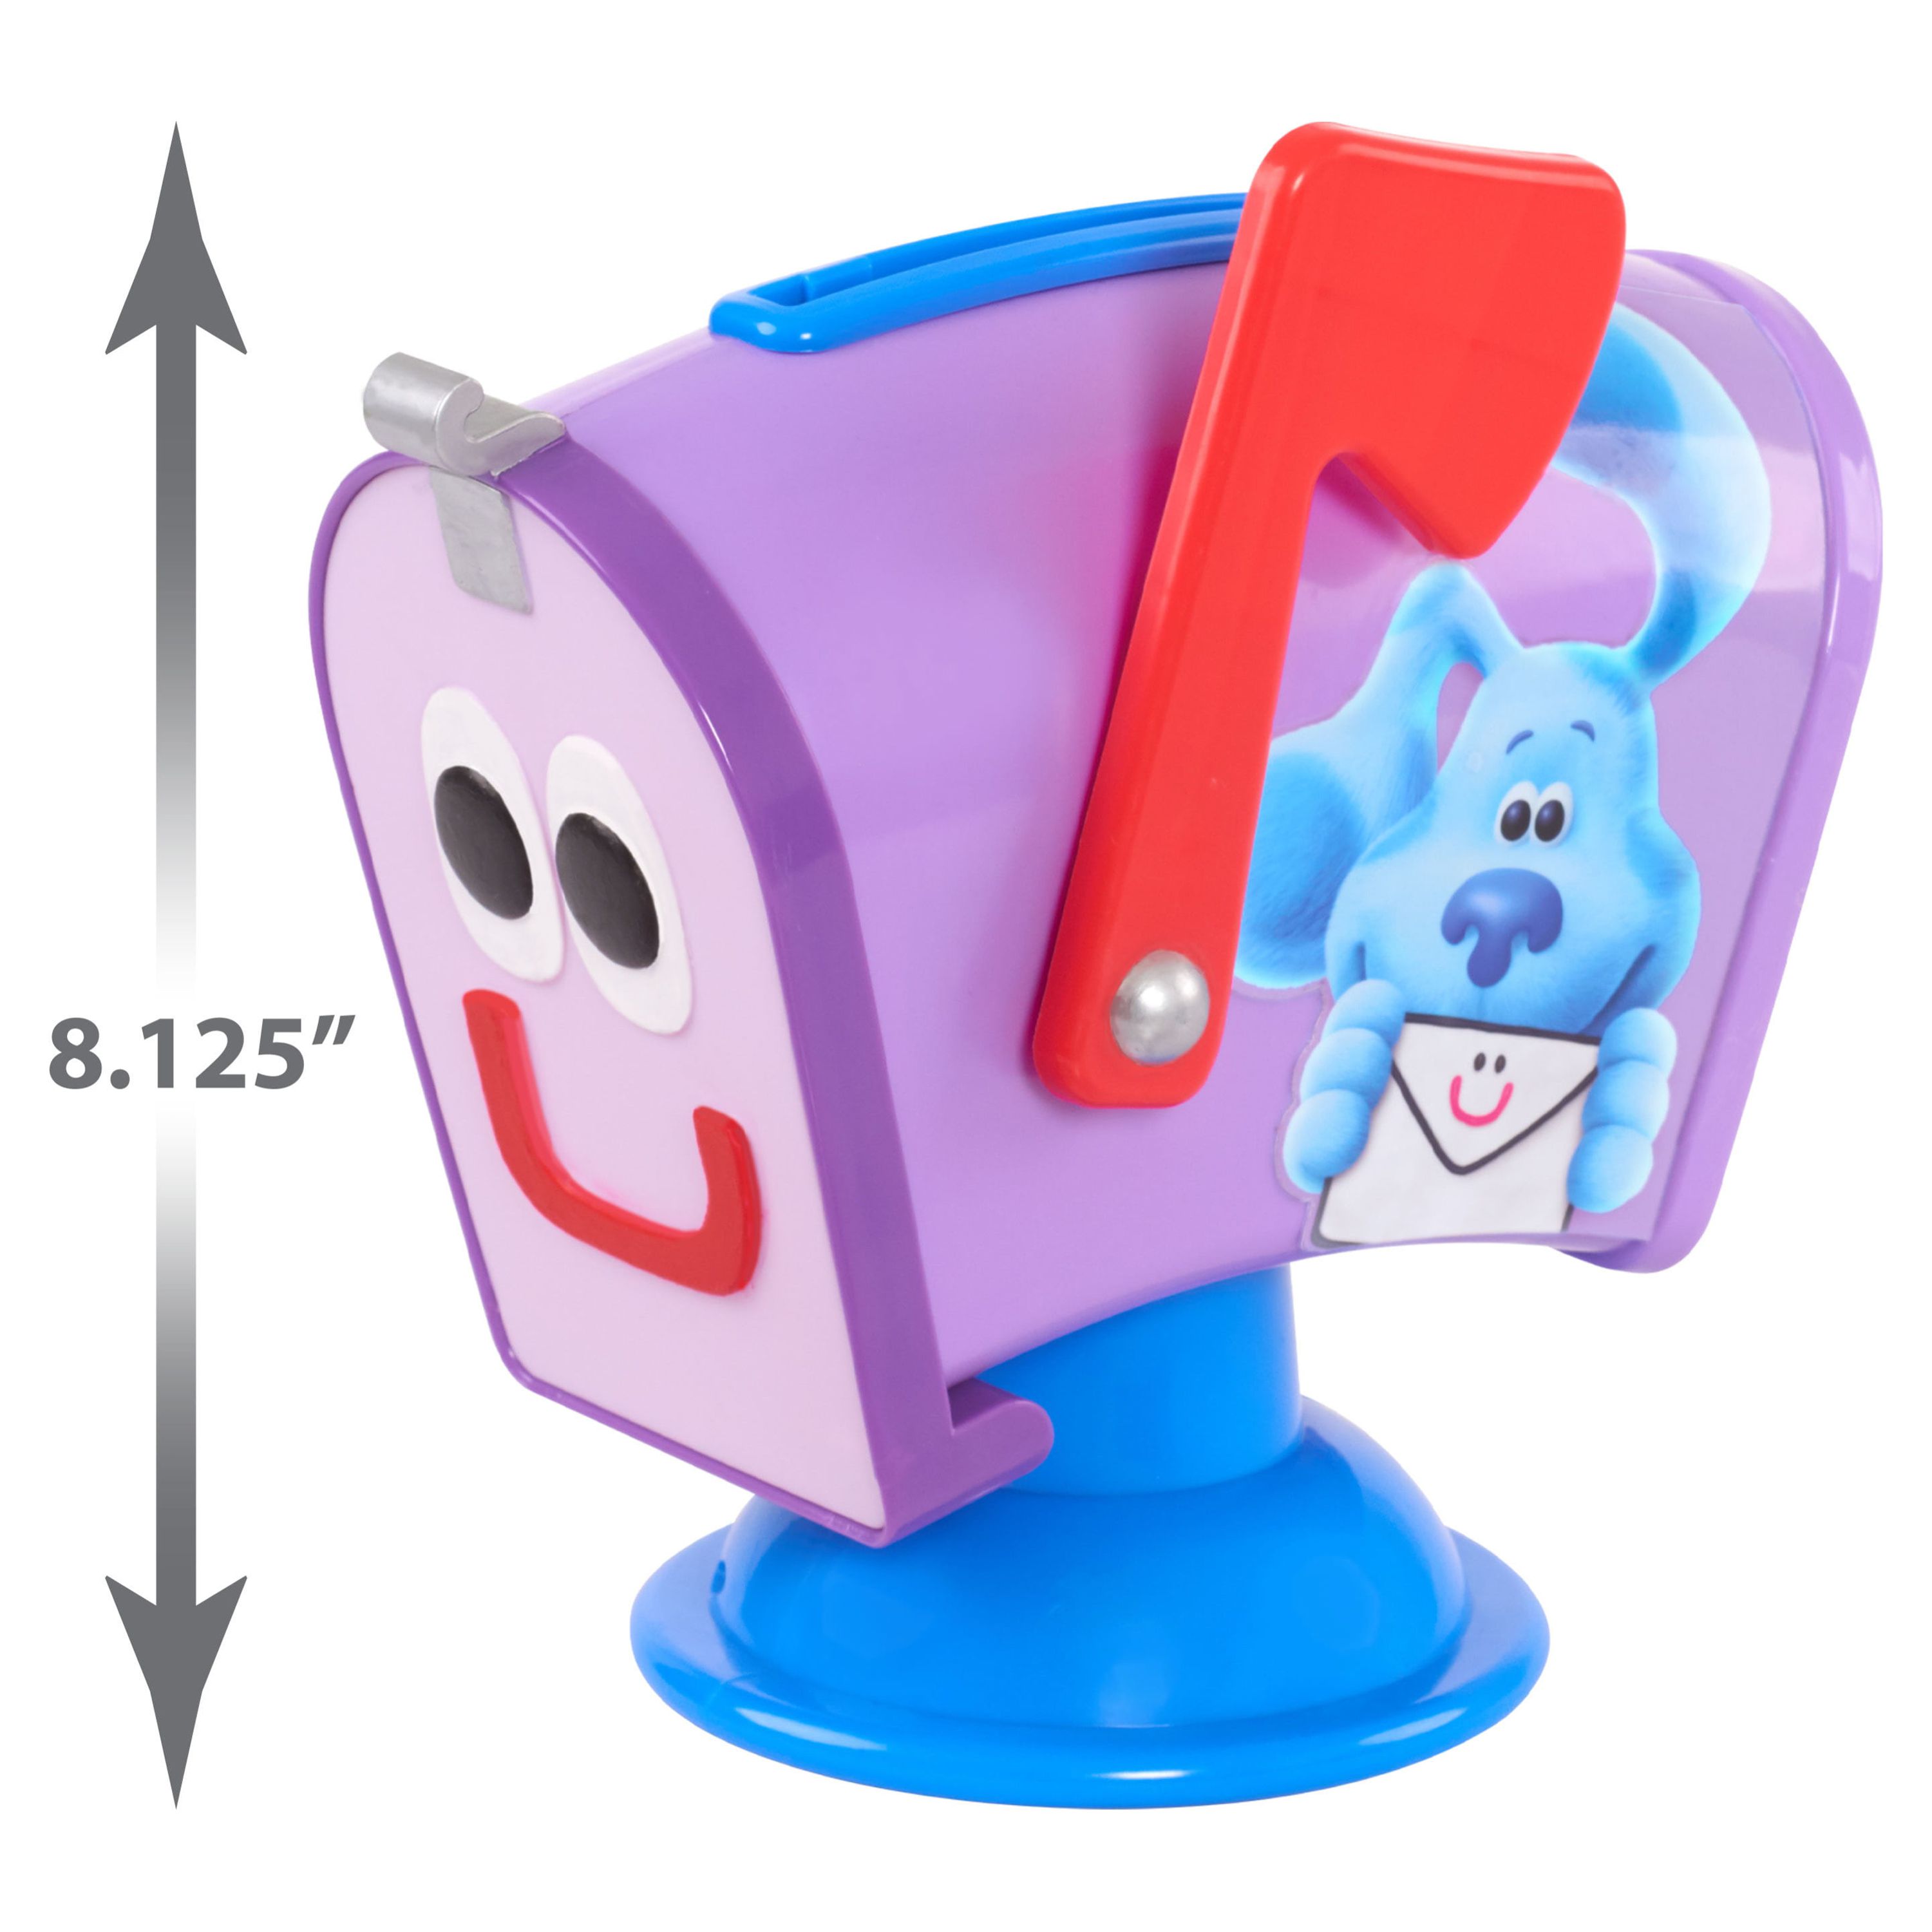 Blue's Clues & You! Mail Time with Mailbox Toy for Kids with Sound,  Kids Toys for Ages 3 Up, Gifts and Presents - image 7 of 8